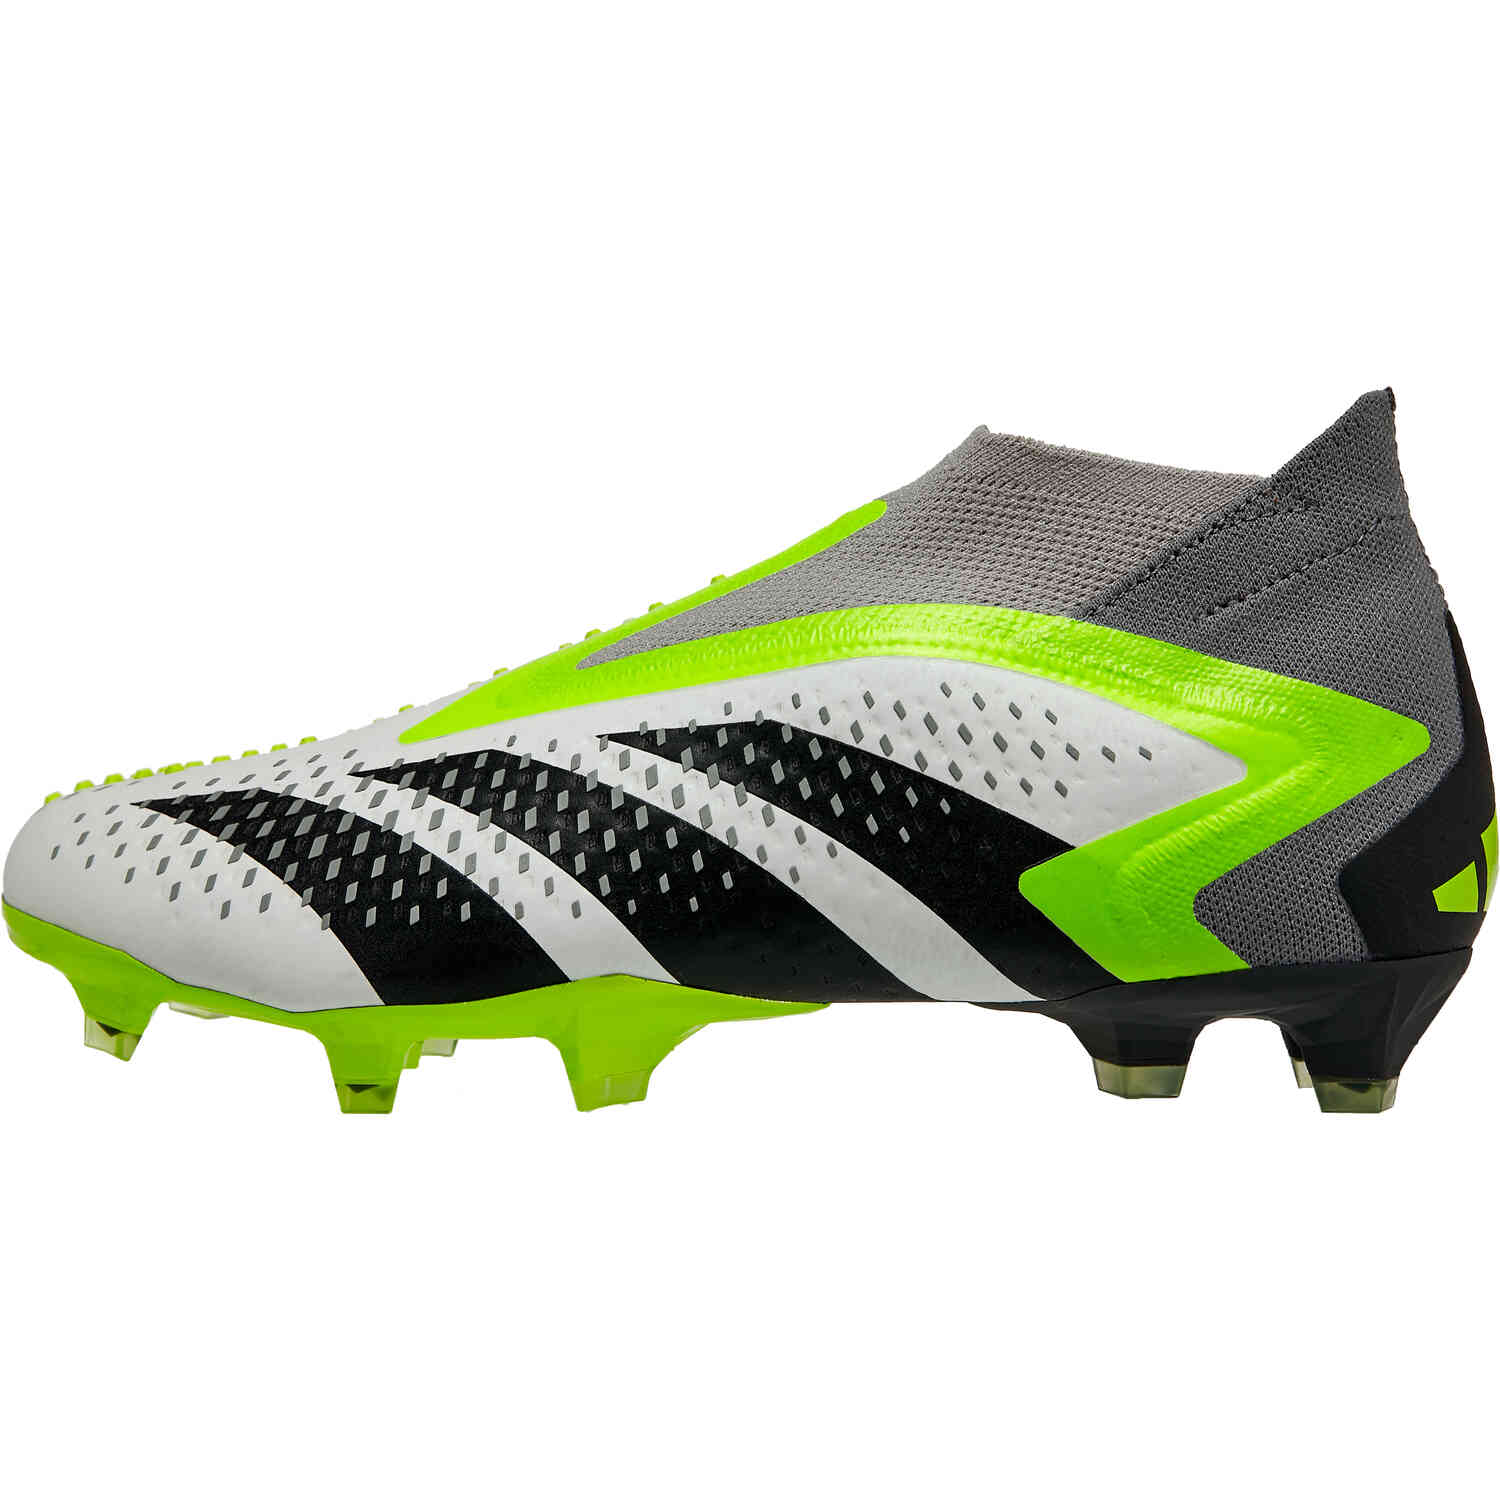 Outlet-Store adidas Predator Accuracy+ FG Cleats & - Firm Soccer - Master Lemon Black Ground Soccer Lucid White